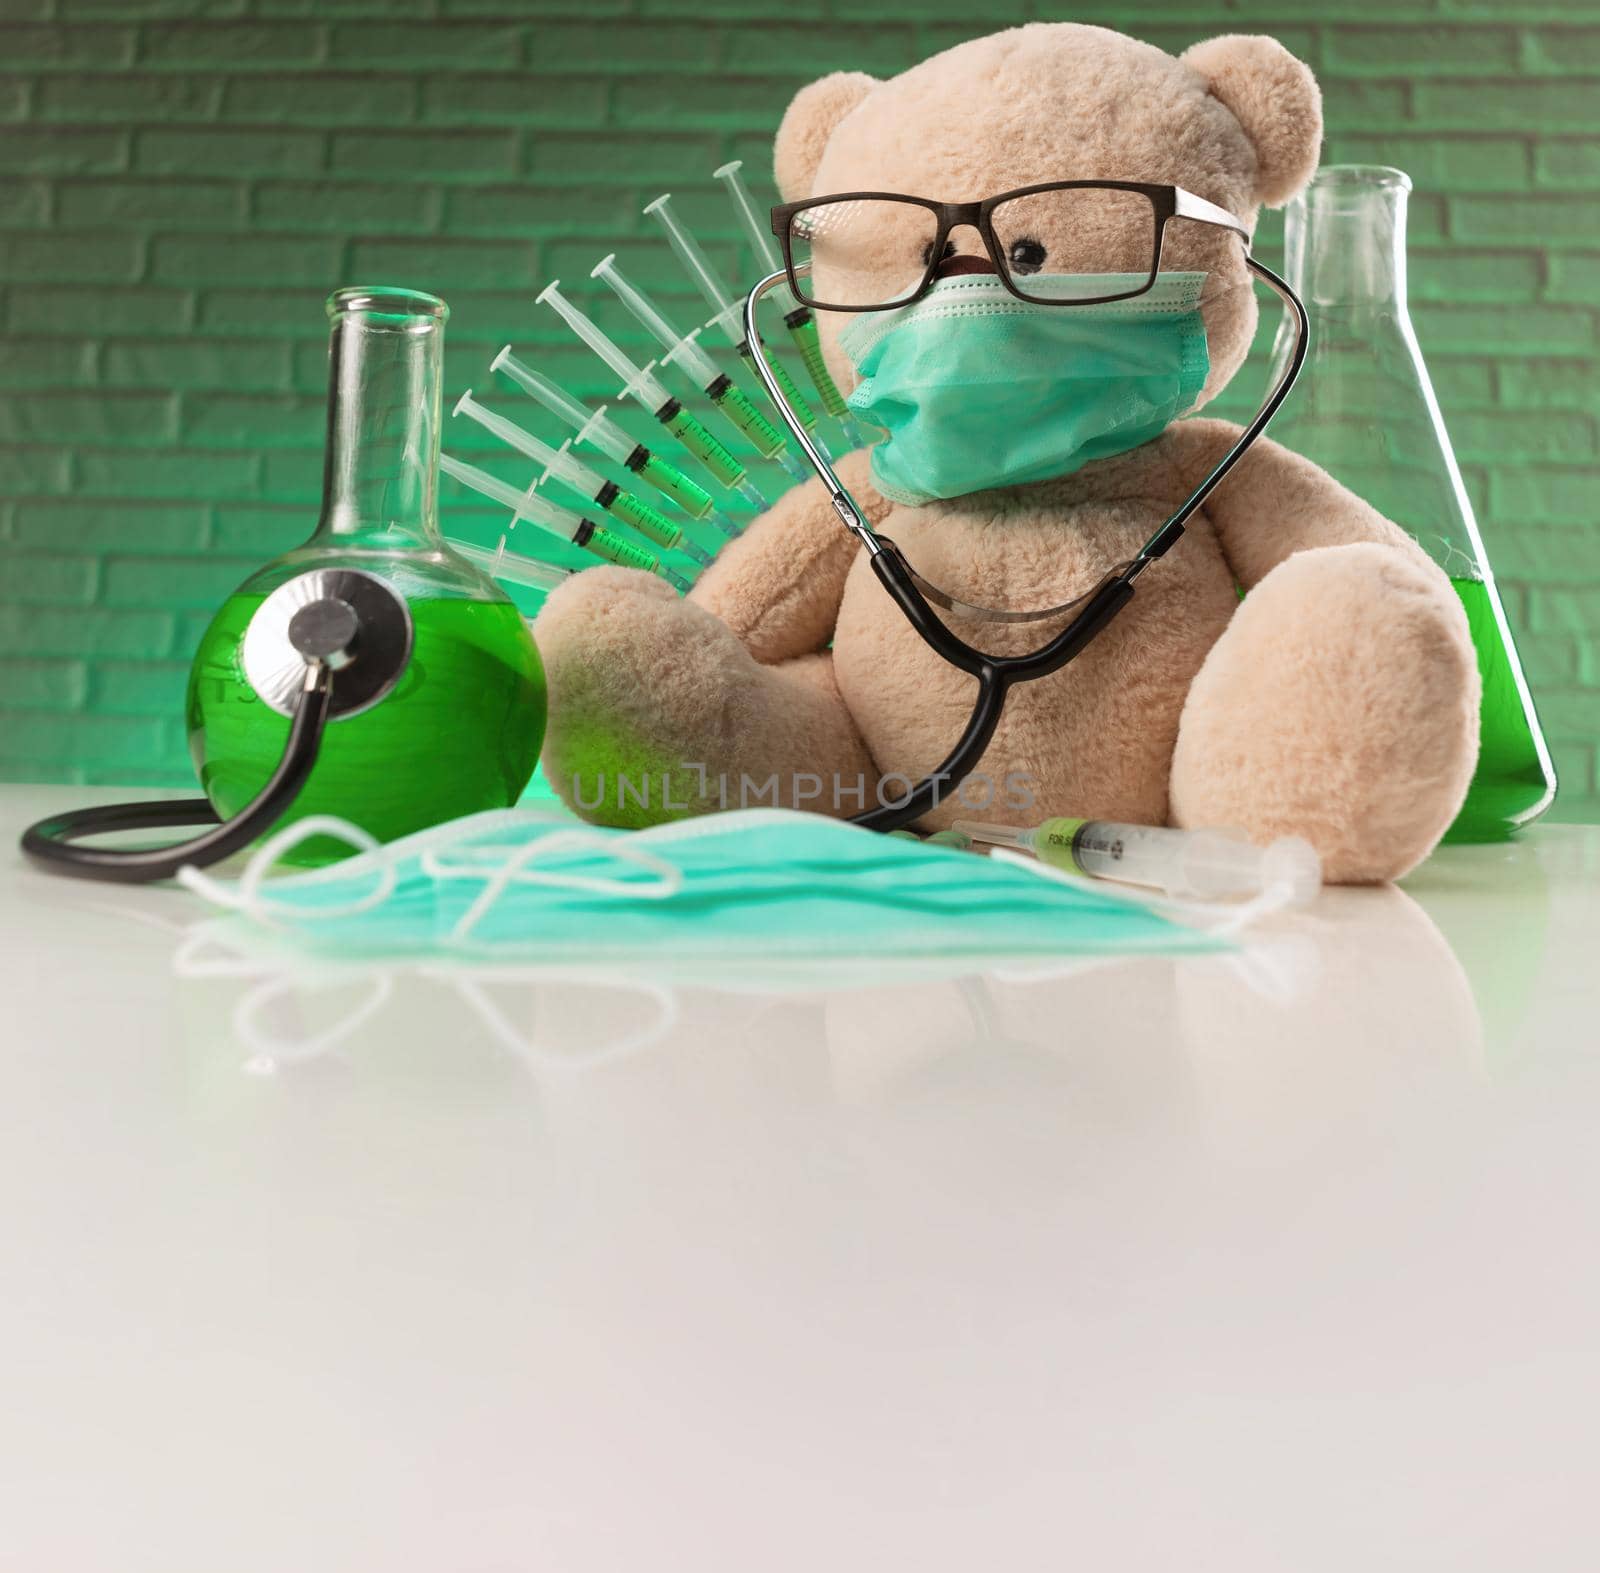 a teddy bear in a medical mask with syringes in his shoulder as a symbol of the research of vaccines and other drugs on animals or people by Rotozey